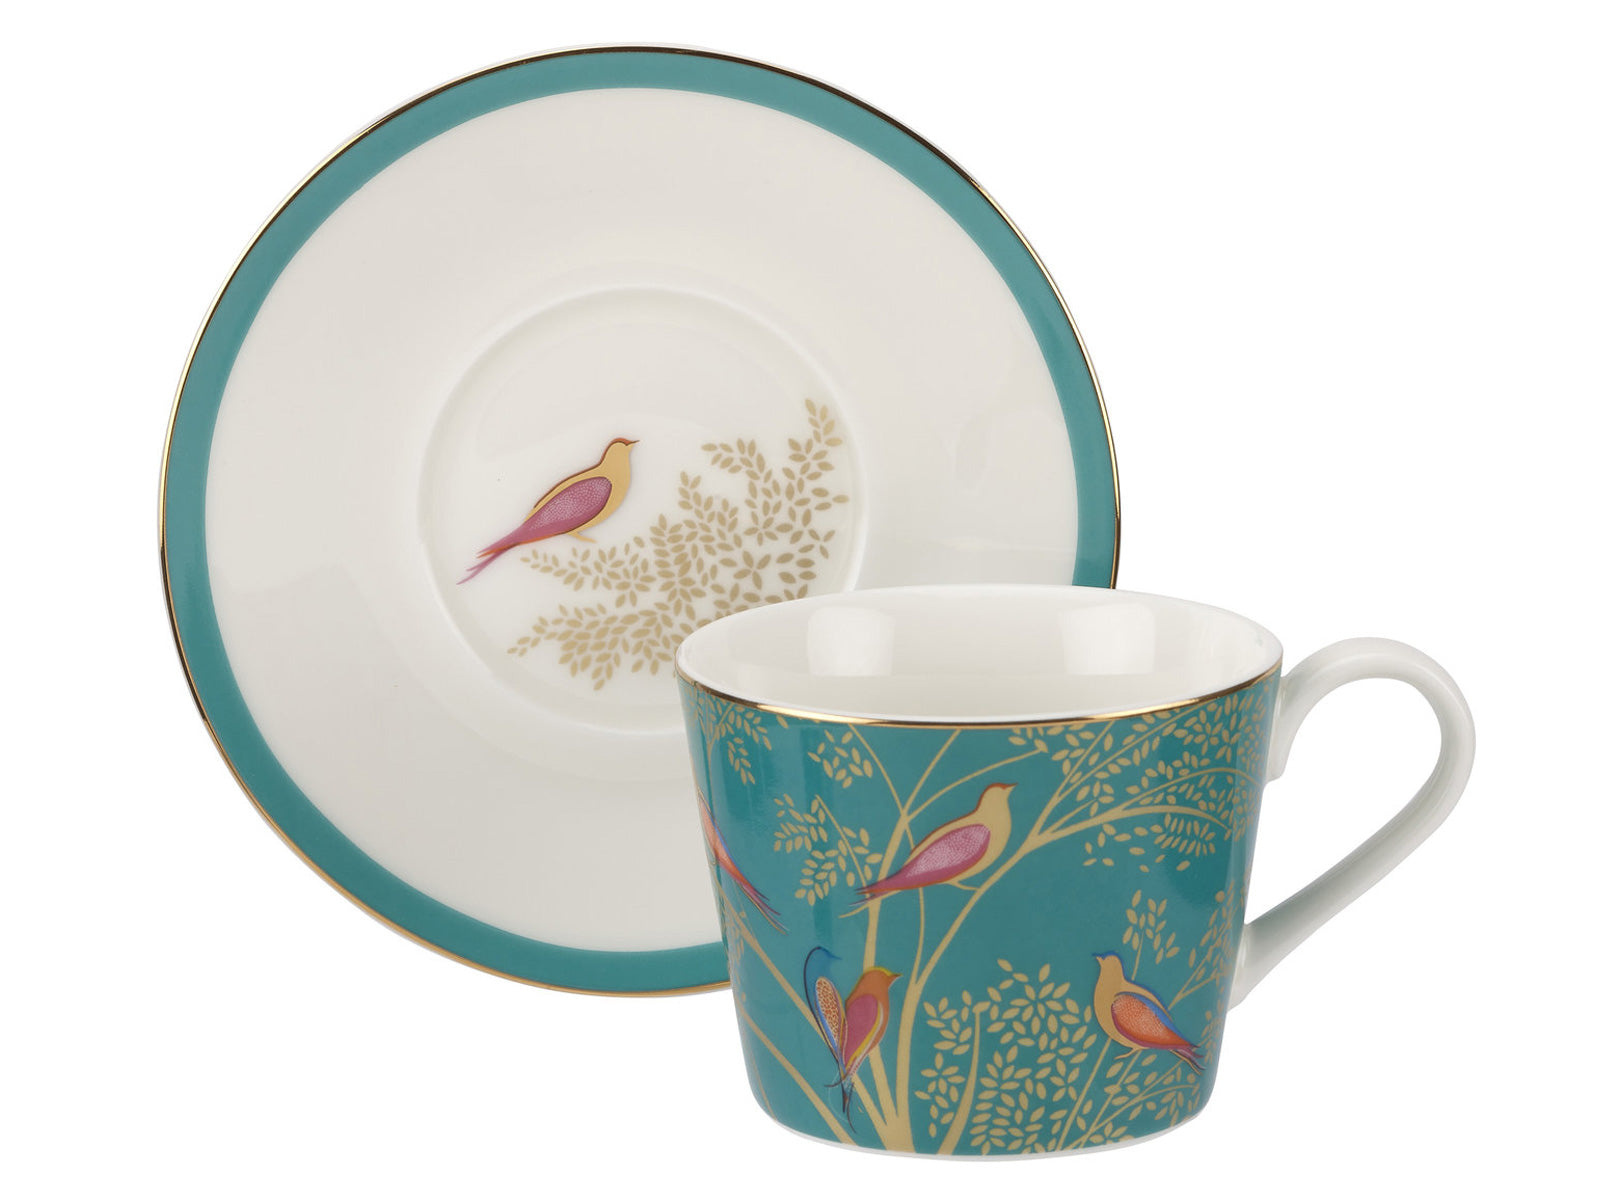 A white porcelain teacup and saucer with a green base, decorated with gold foliage and rightly coloured birds.